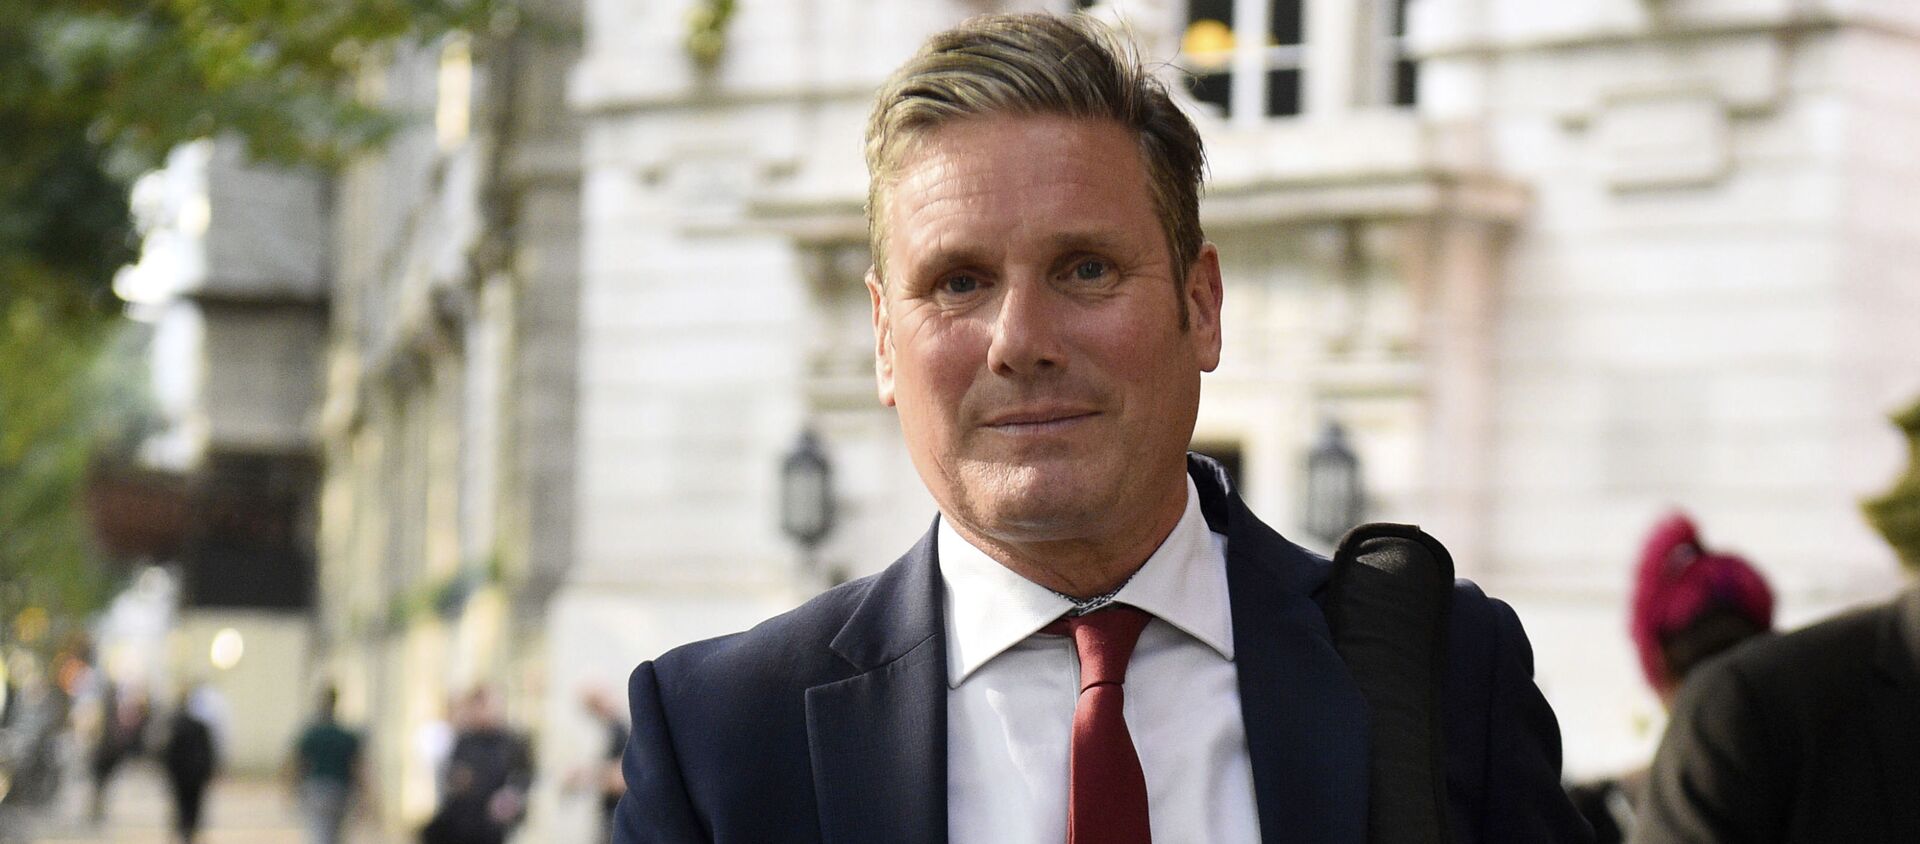 Keir Starmer, Britain's main opposition Labour Party Shadow Secretary of State for Exiting the European Union, in central London, Tuesday Aug. 27, 2019 - Sputnik International, 1920, 07.05.2021